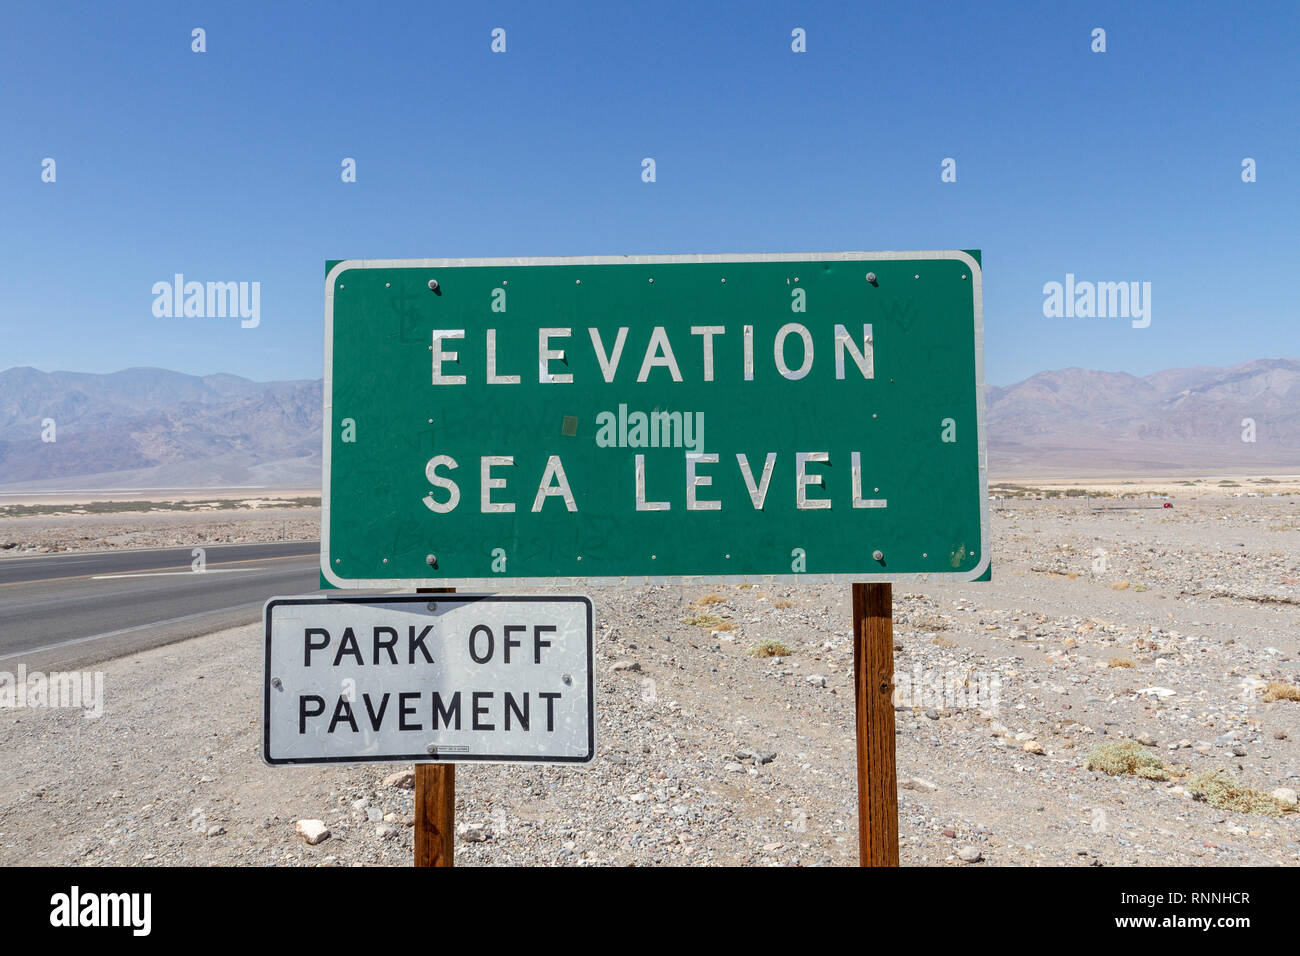 'Elevation Sea Level' road sign in Furnace Creek, Death Valley National Park, California, United States. Stock Photo